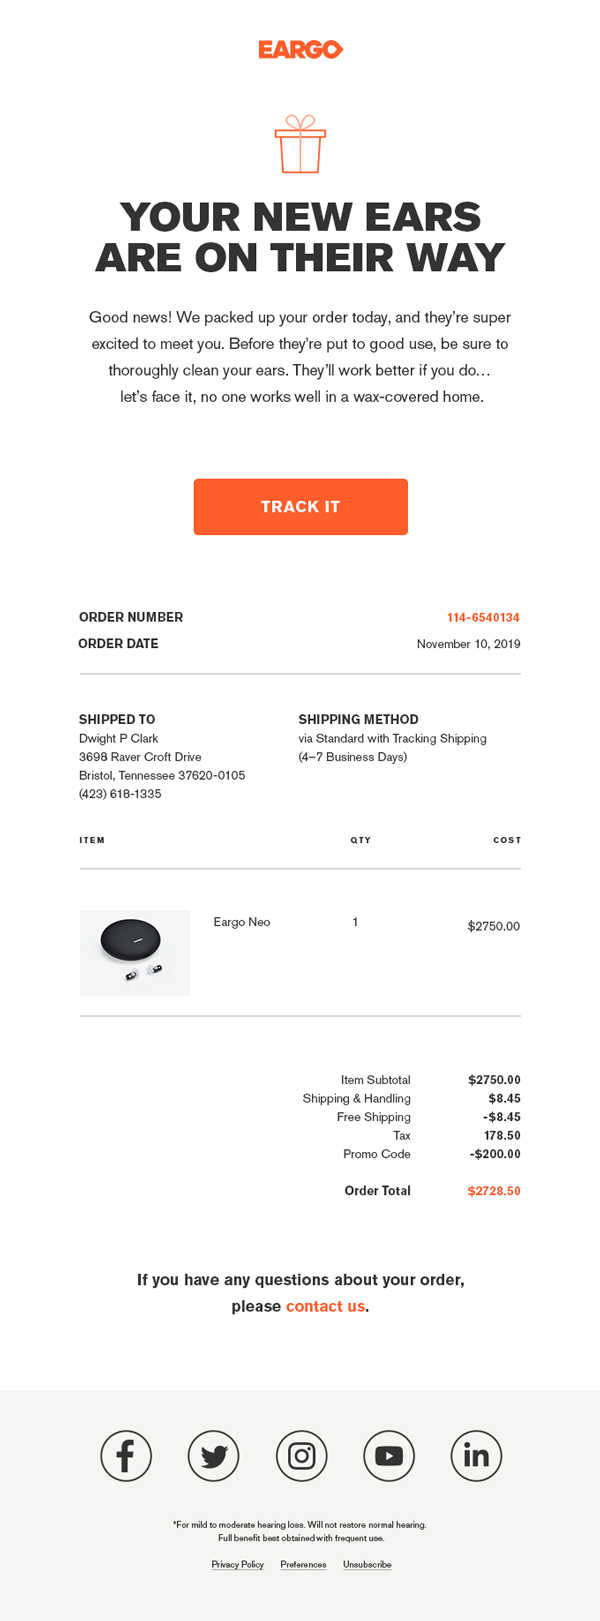 Eargo email order confirmation design by Silky Szeto